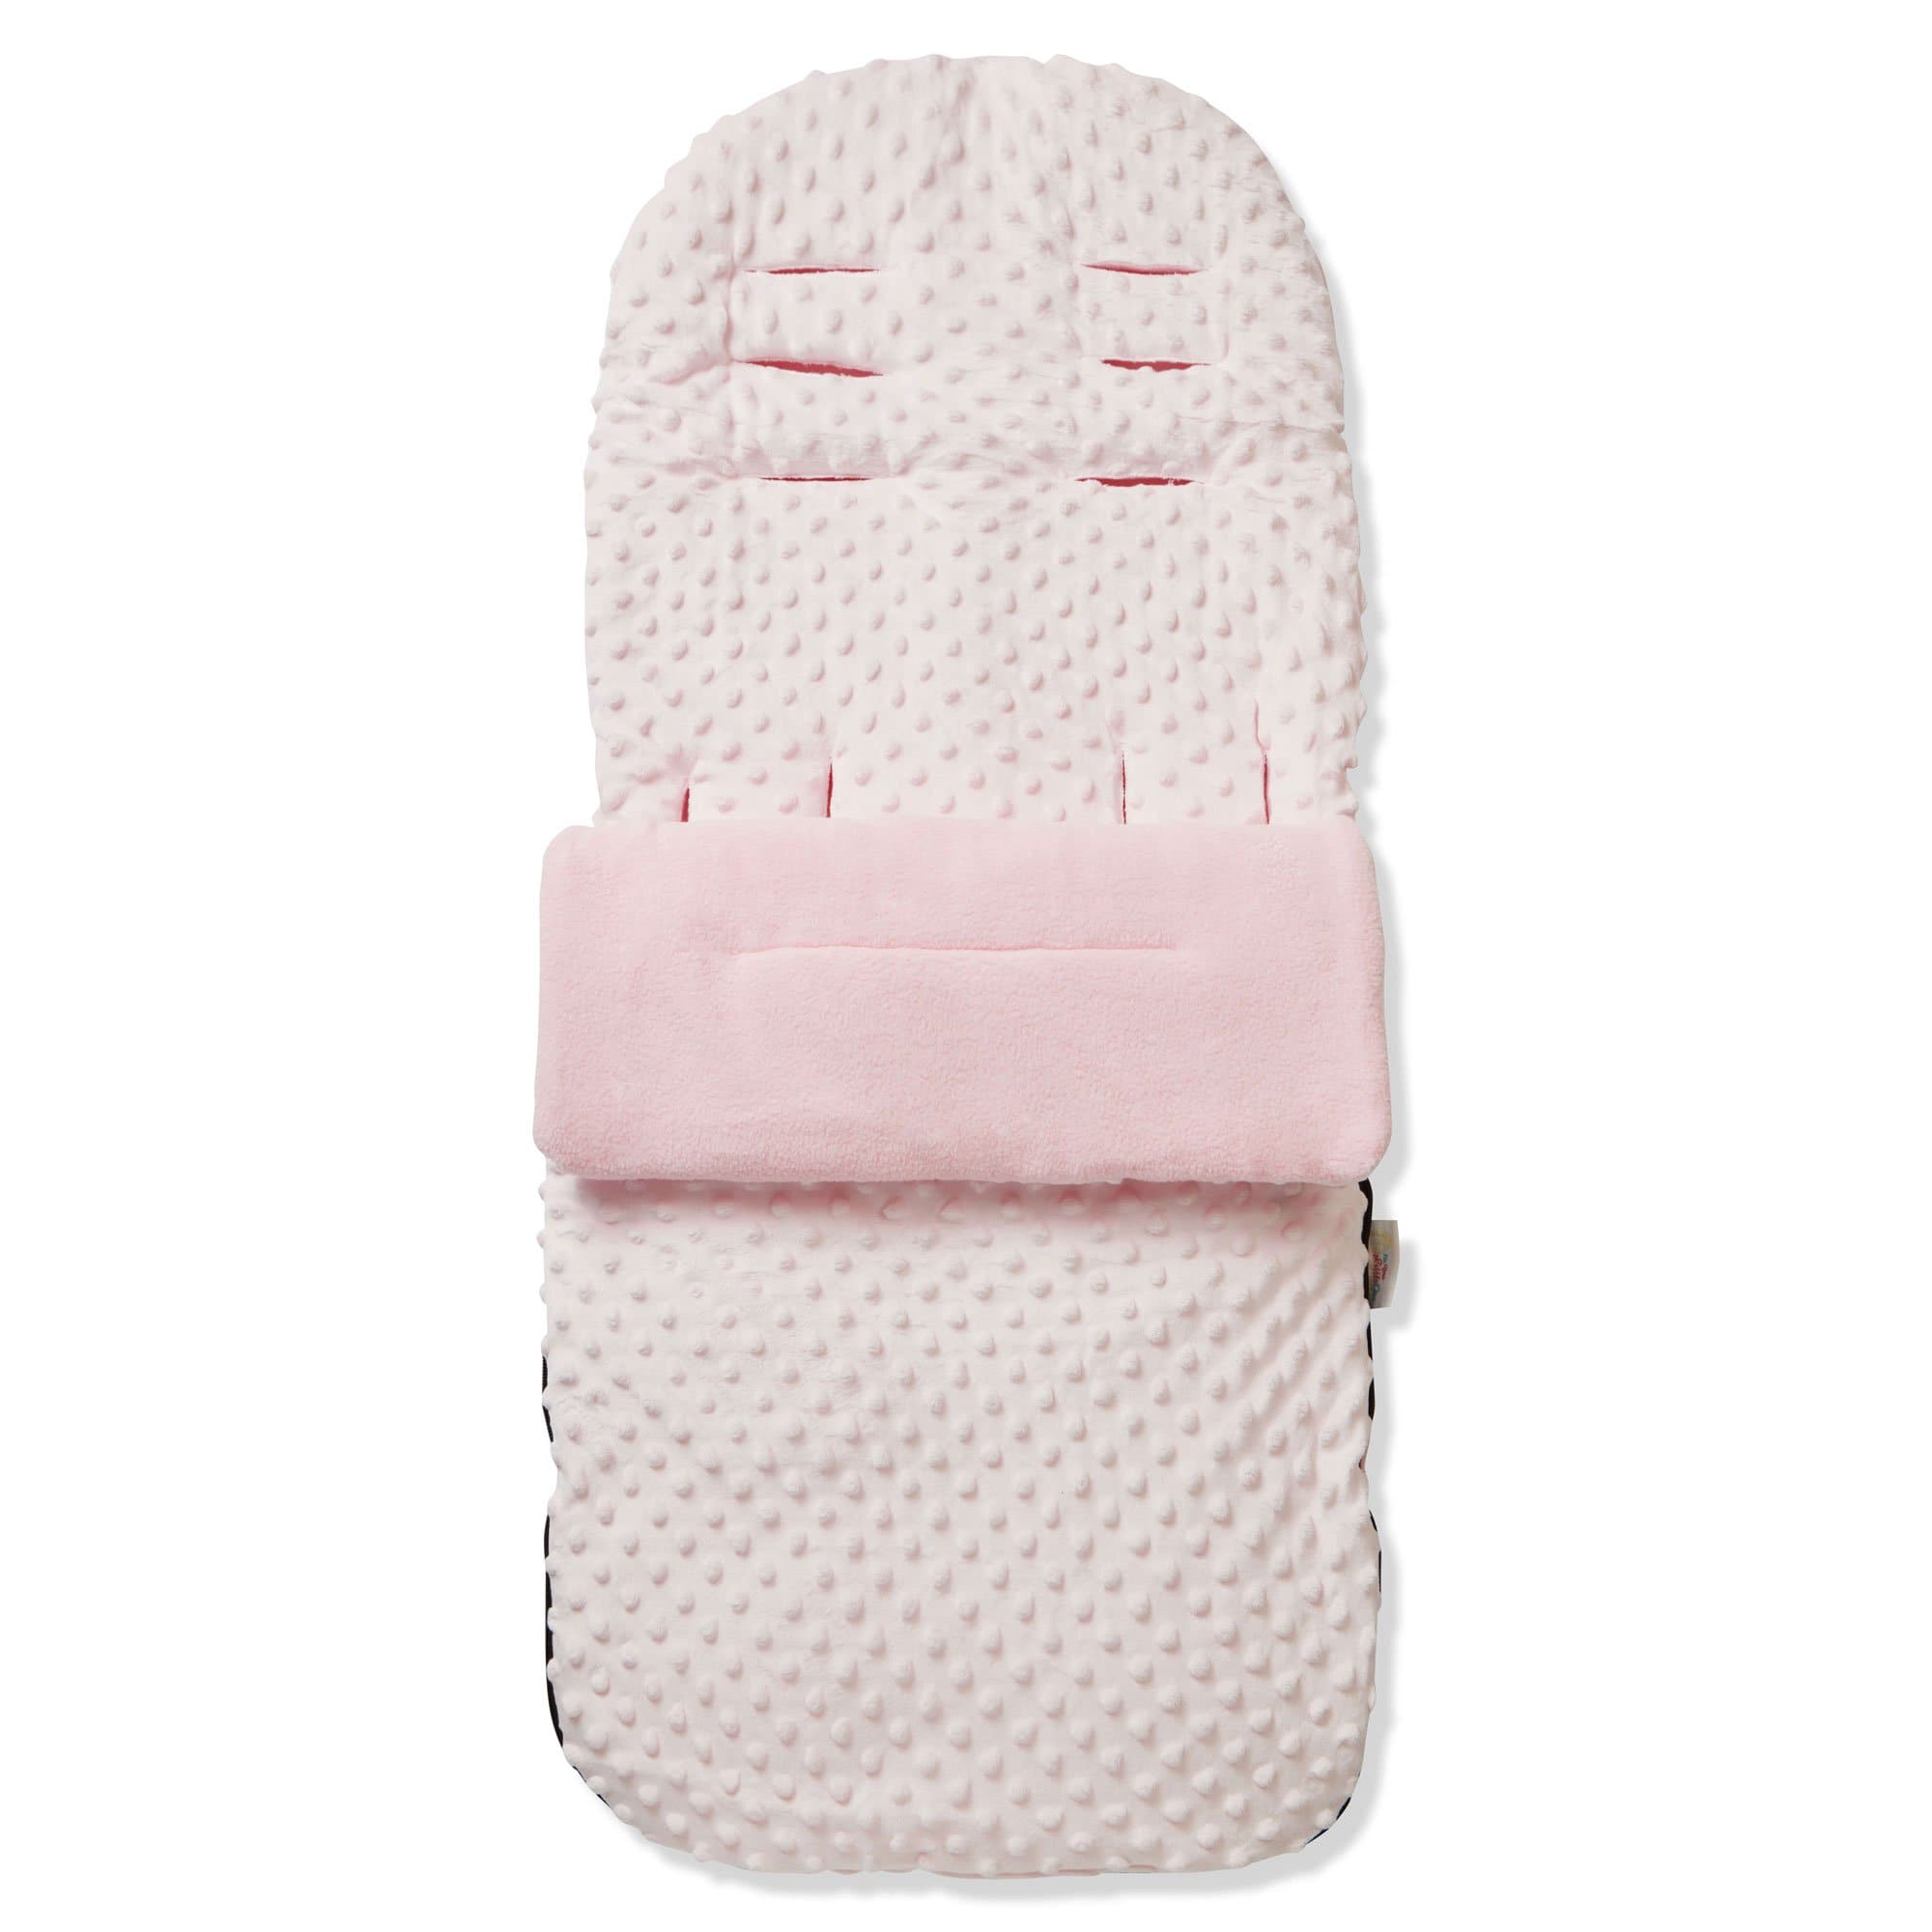 Dimple Footmuff / Cosy Toes Compatible with Kiddicare - Pink / Fits All Models | For Your Little One